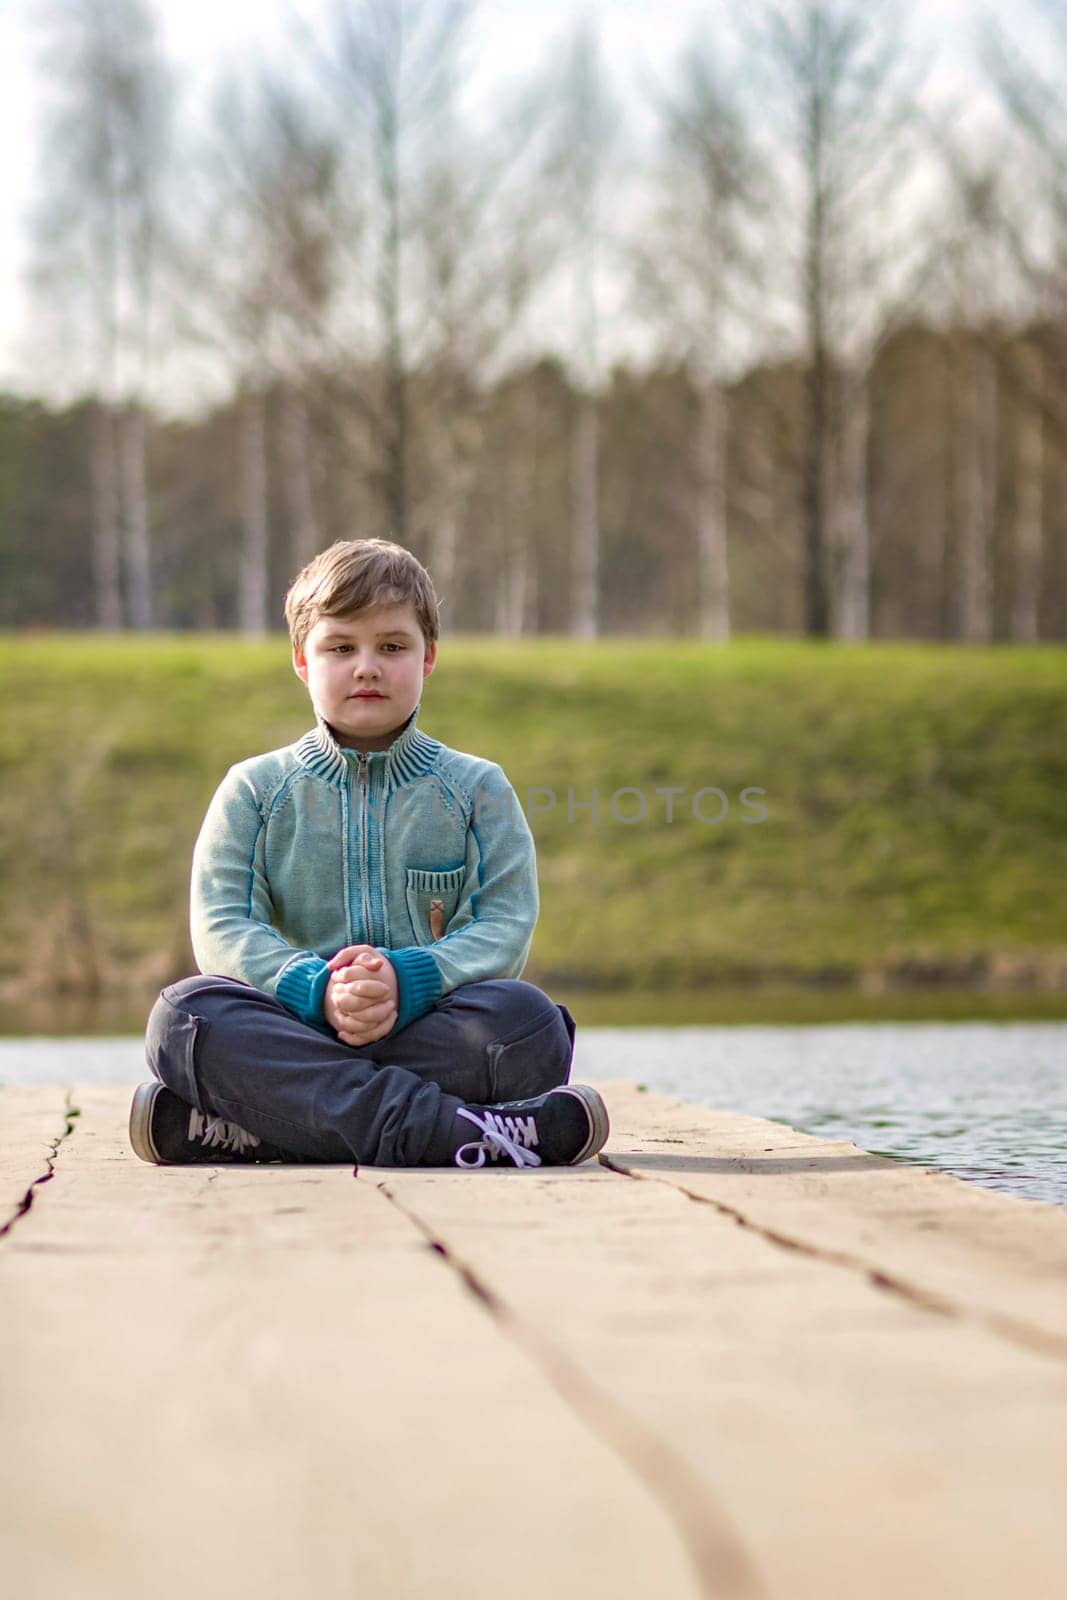 A boy is sitting on a bridge in a green park. The path is a bridge over the lake. Long wooden flooring